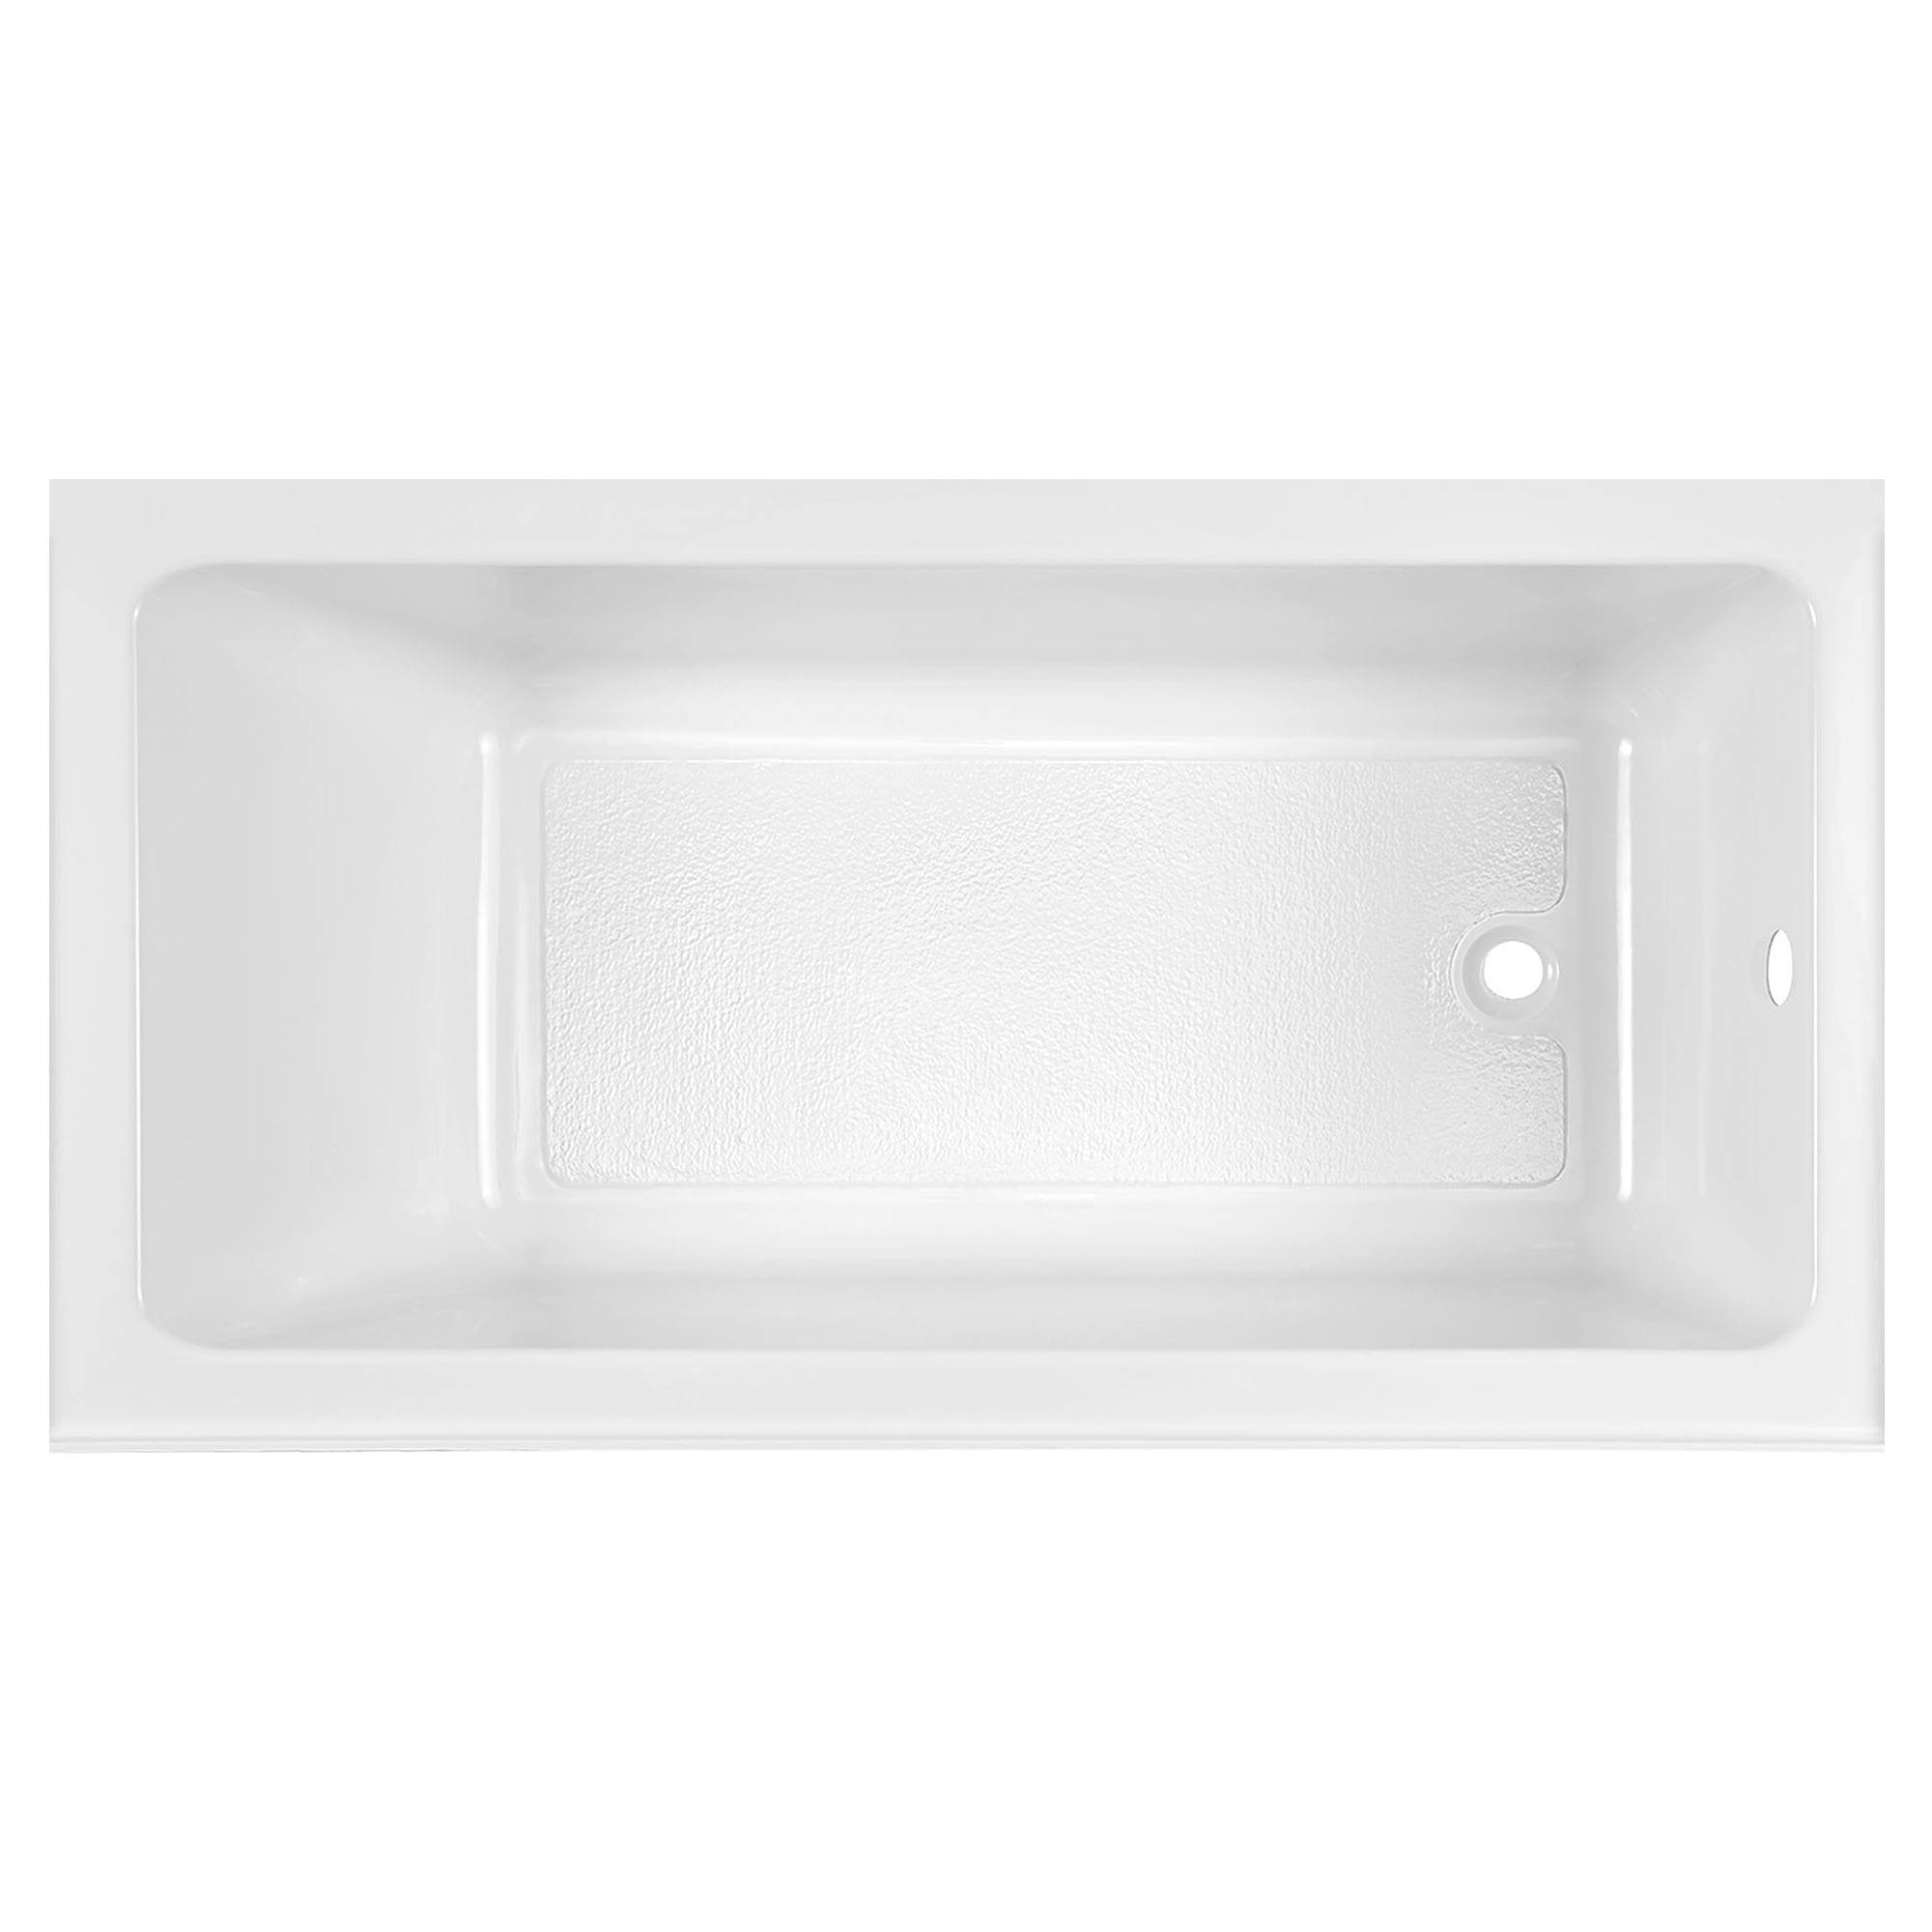 Studio 60 x 30 Inch Integral Apron Bathtub Above Floor Rough with Right Hand Outlet ARCTIC